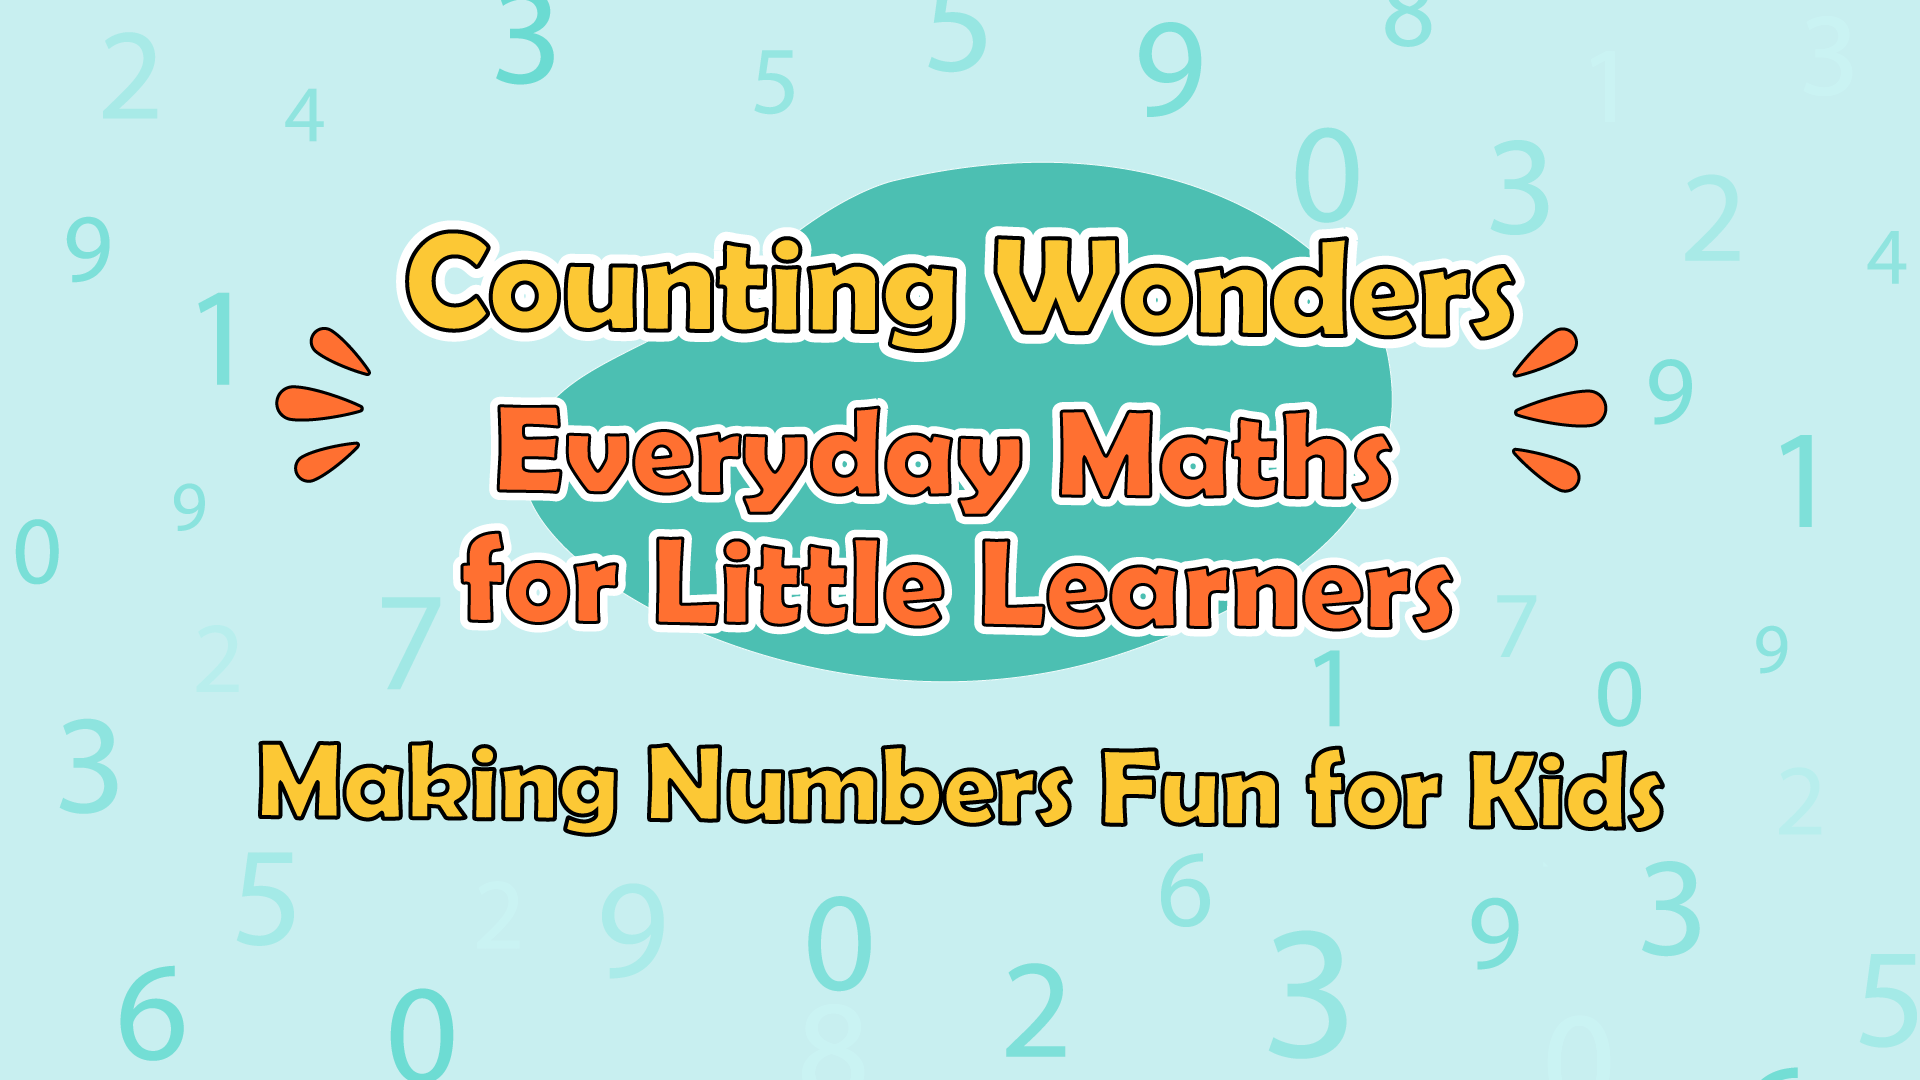 Counting Wonders: Everyday Maths for Little Learners – Making Numbers Fun for Kids